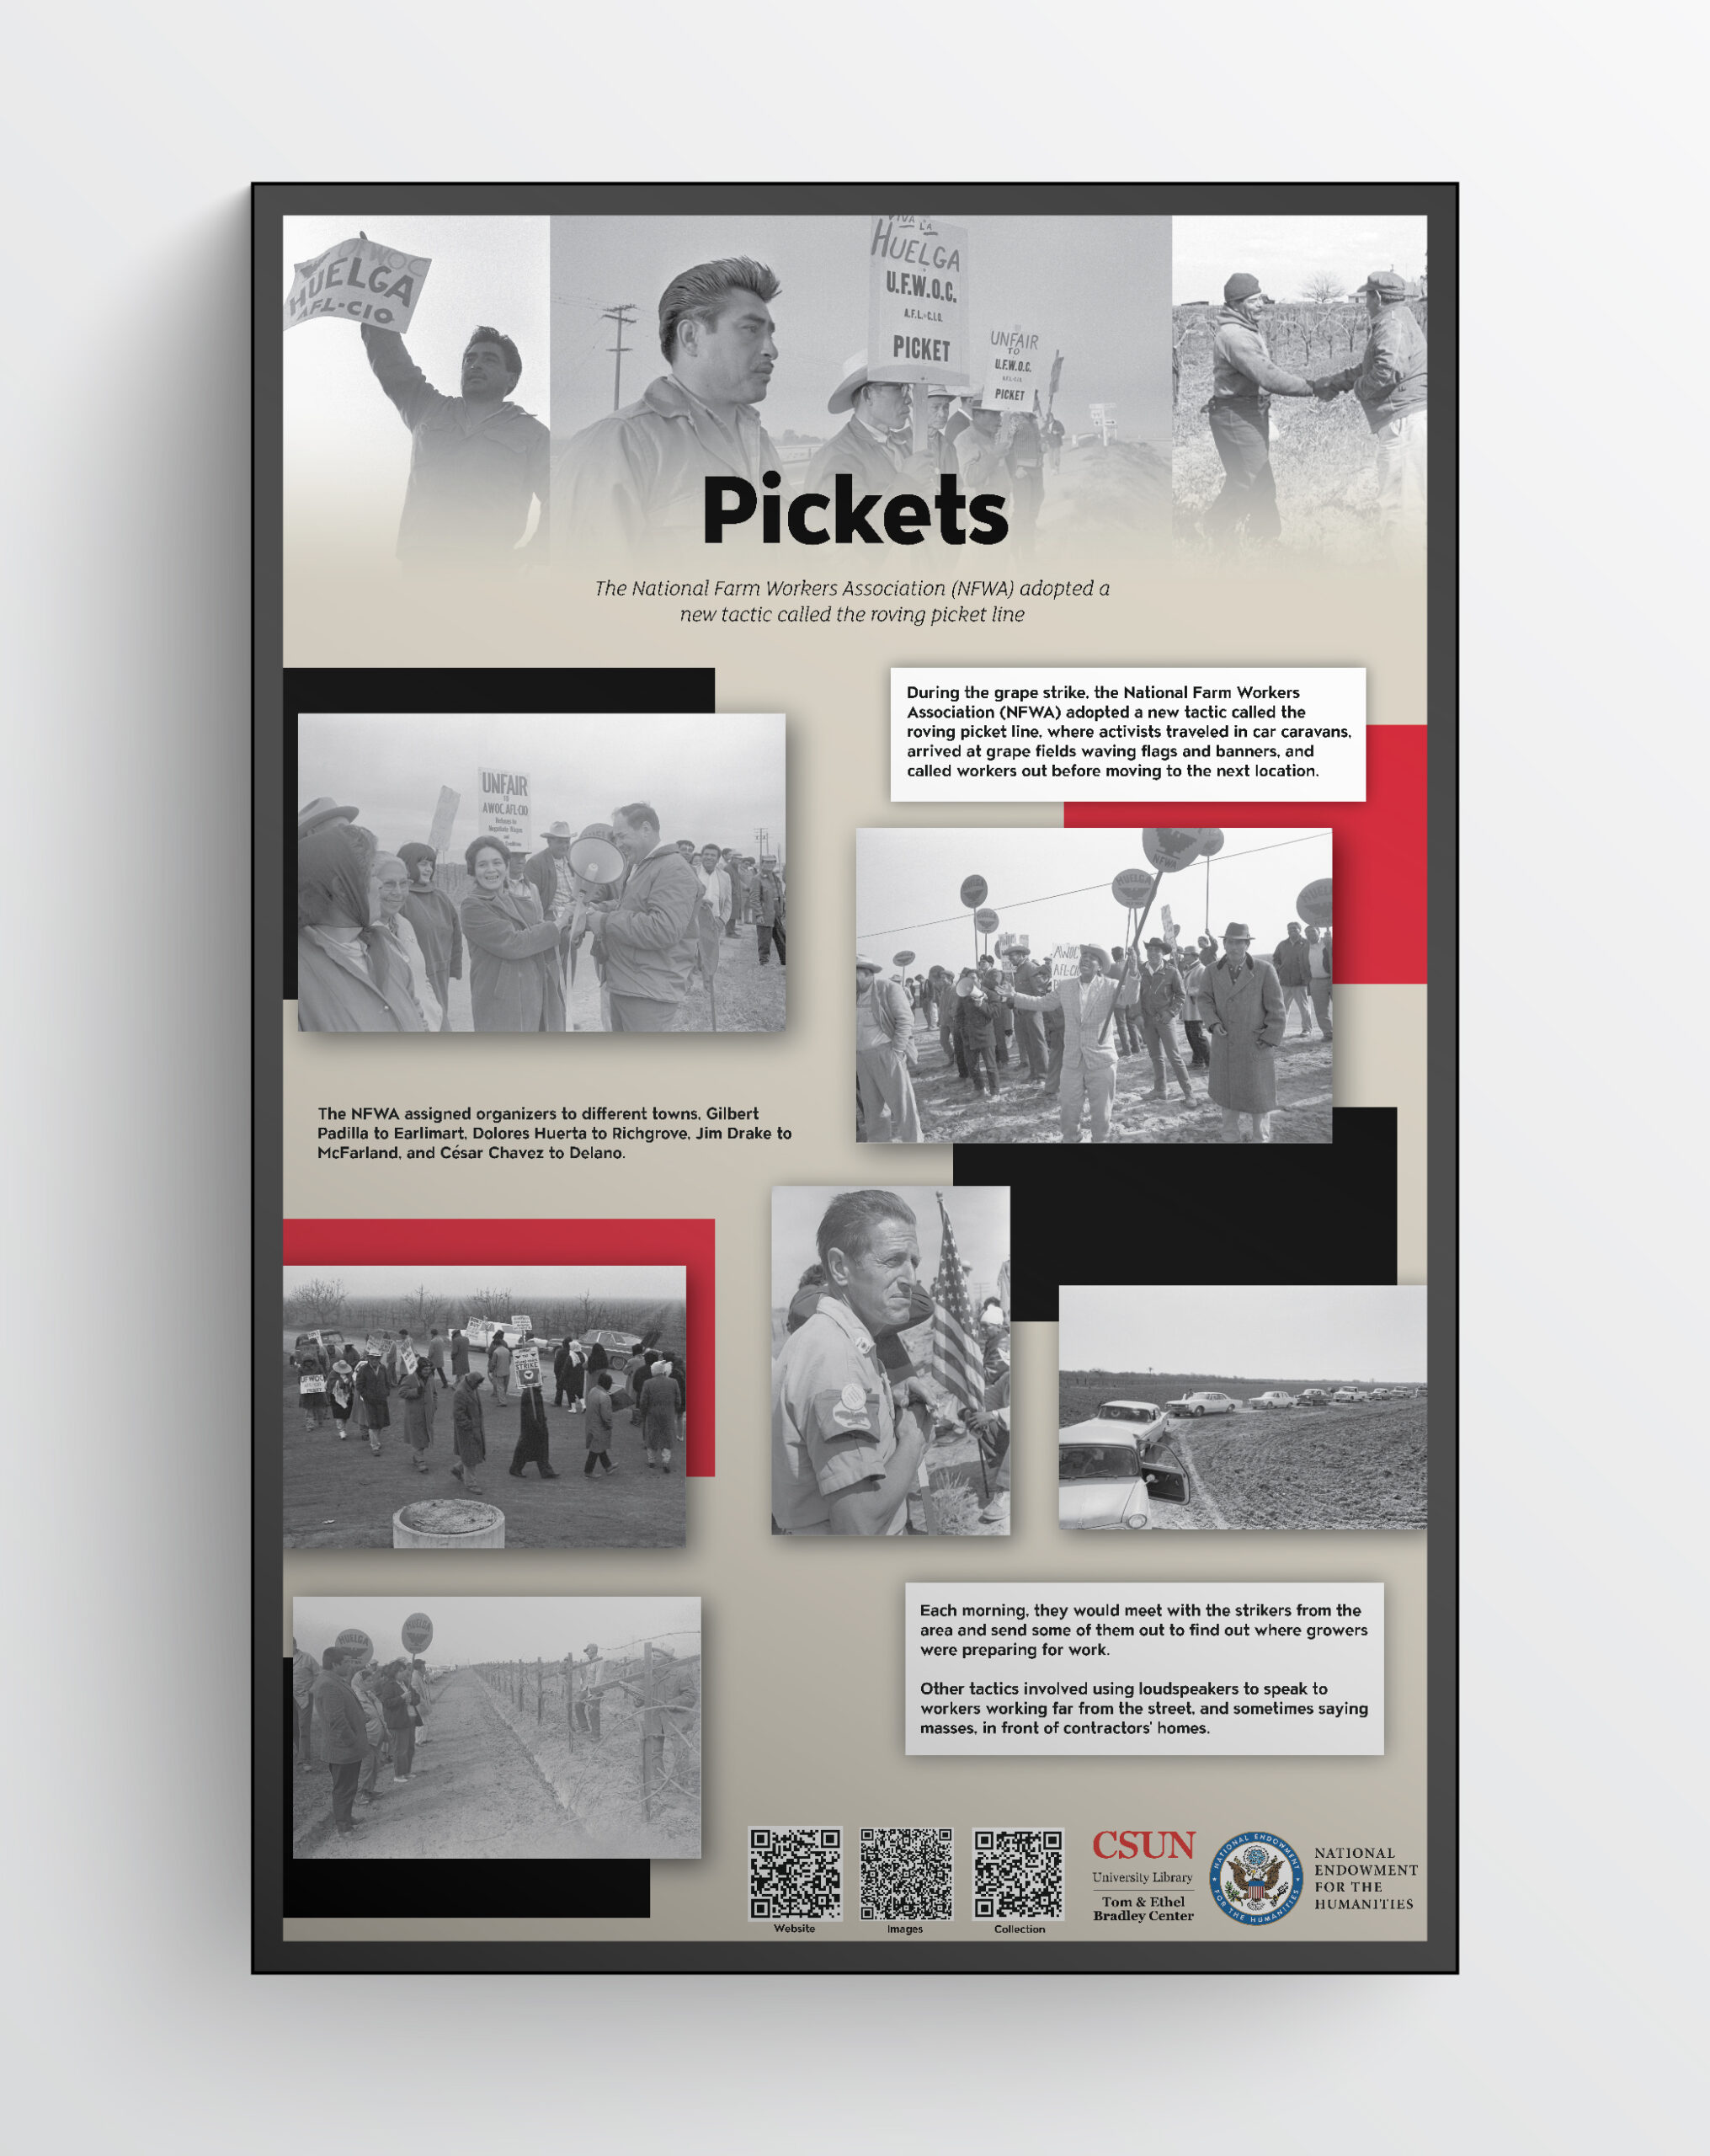 Panel of Pickets.